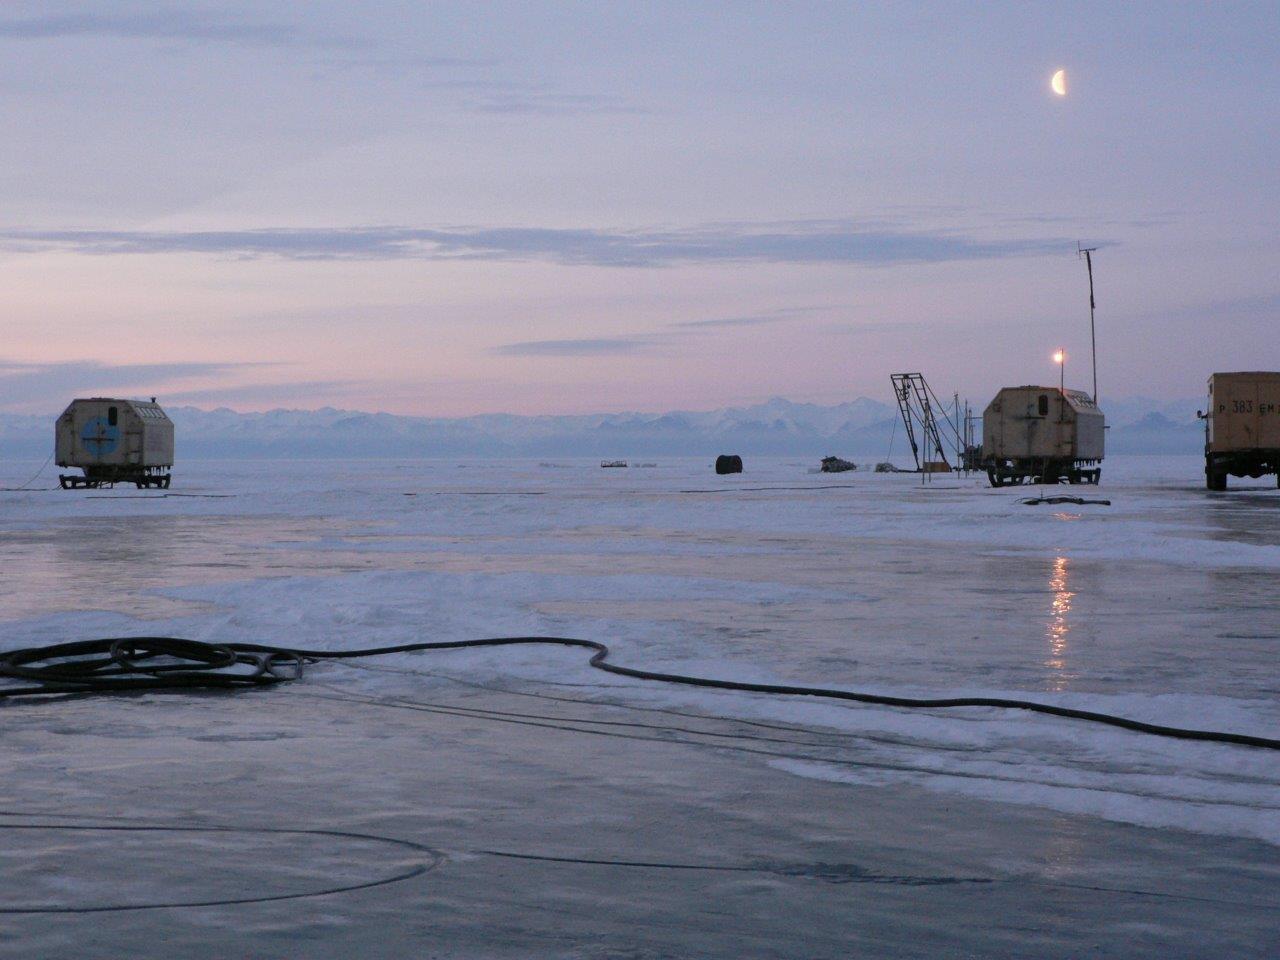 Lake Baikal in Siberia. Under the ice is the world's first underwater telescope designed to detect neutrinos.